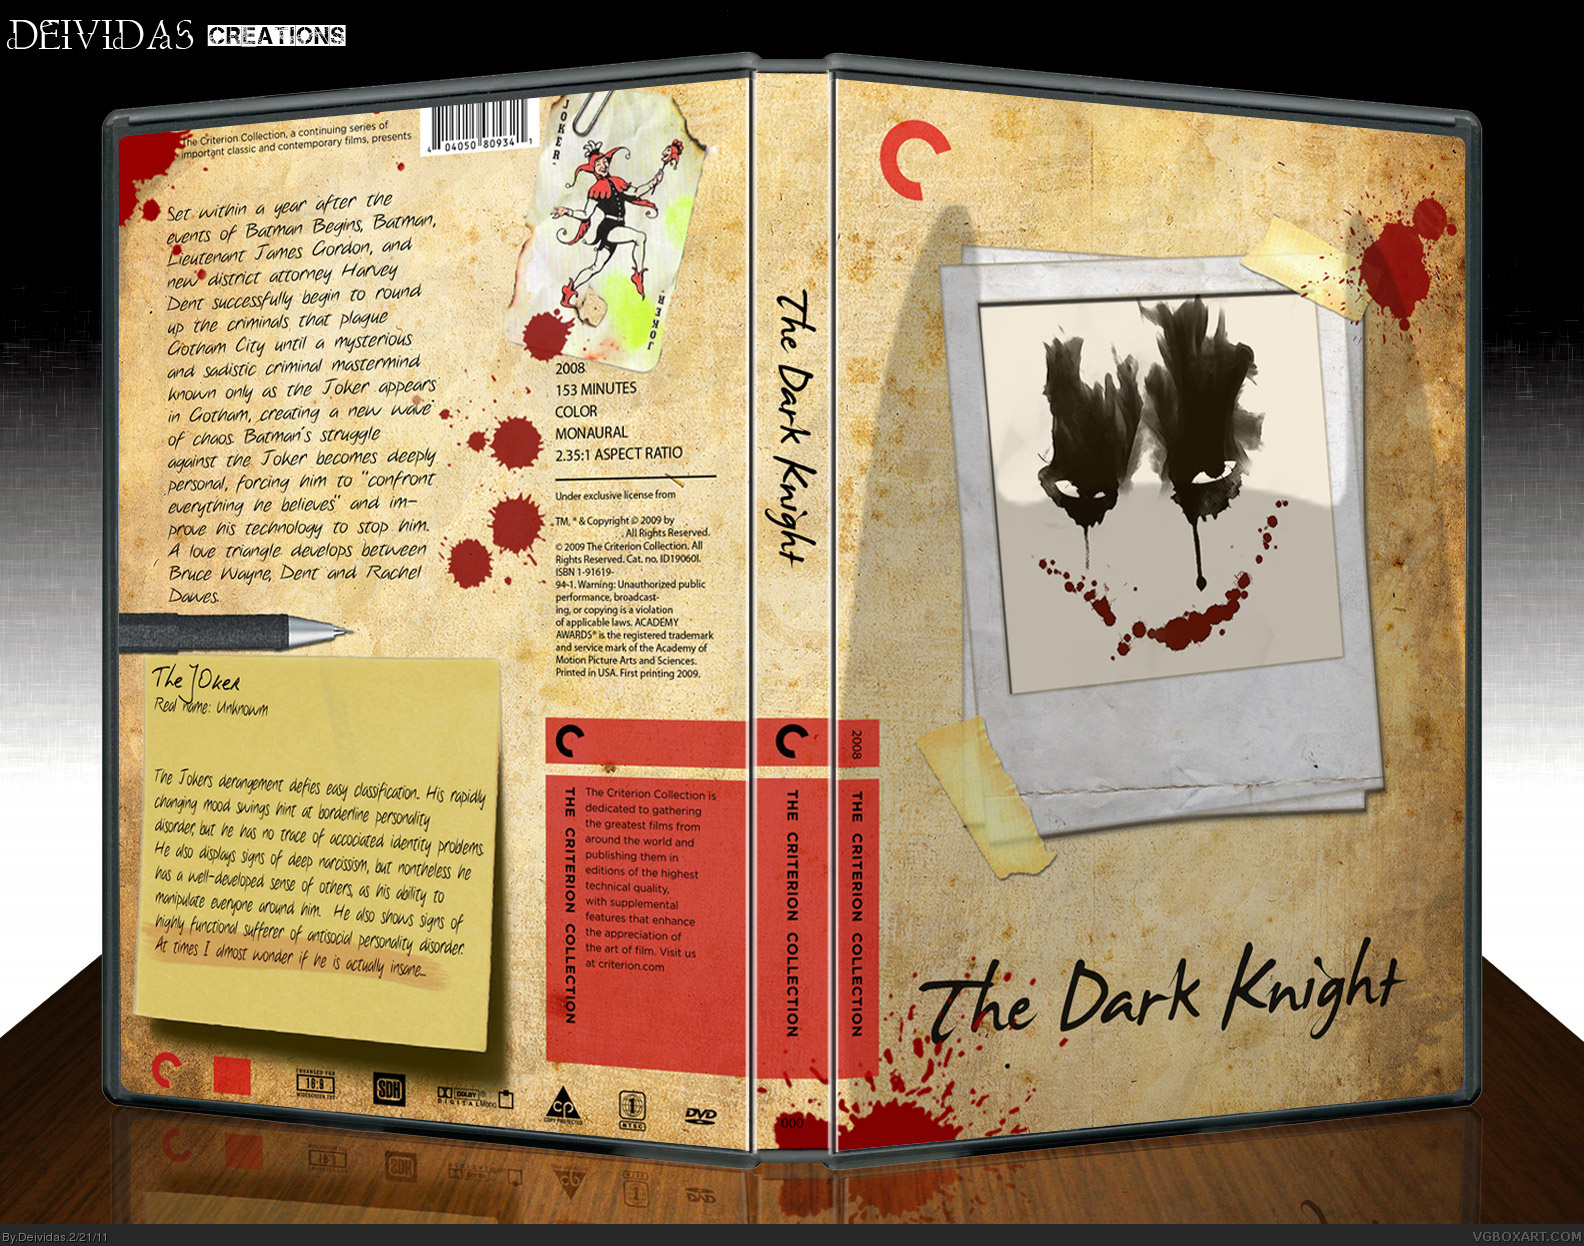 The Dark Knight: Criterion Collection box cover